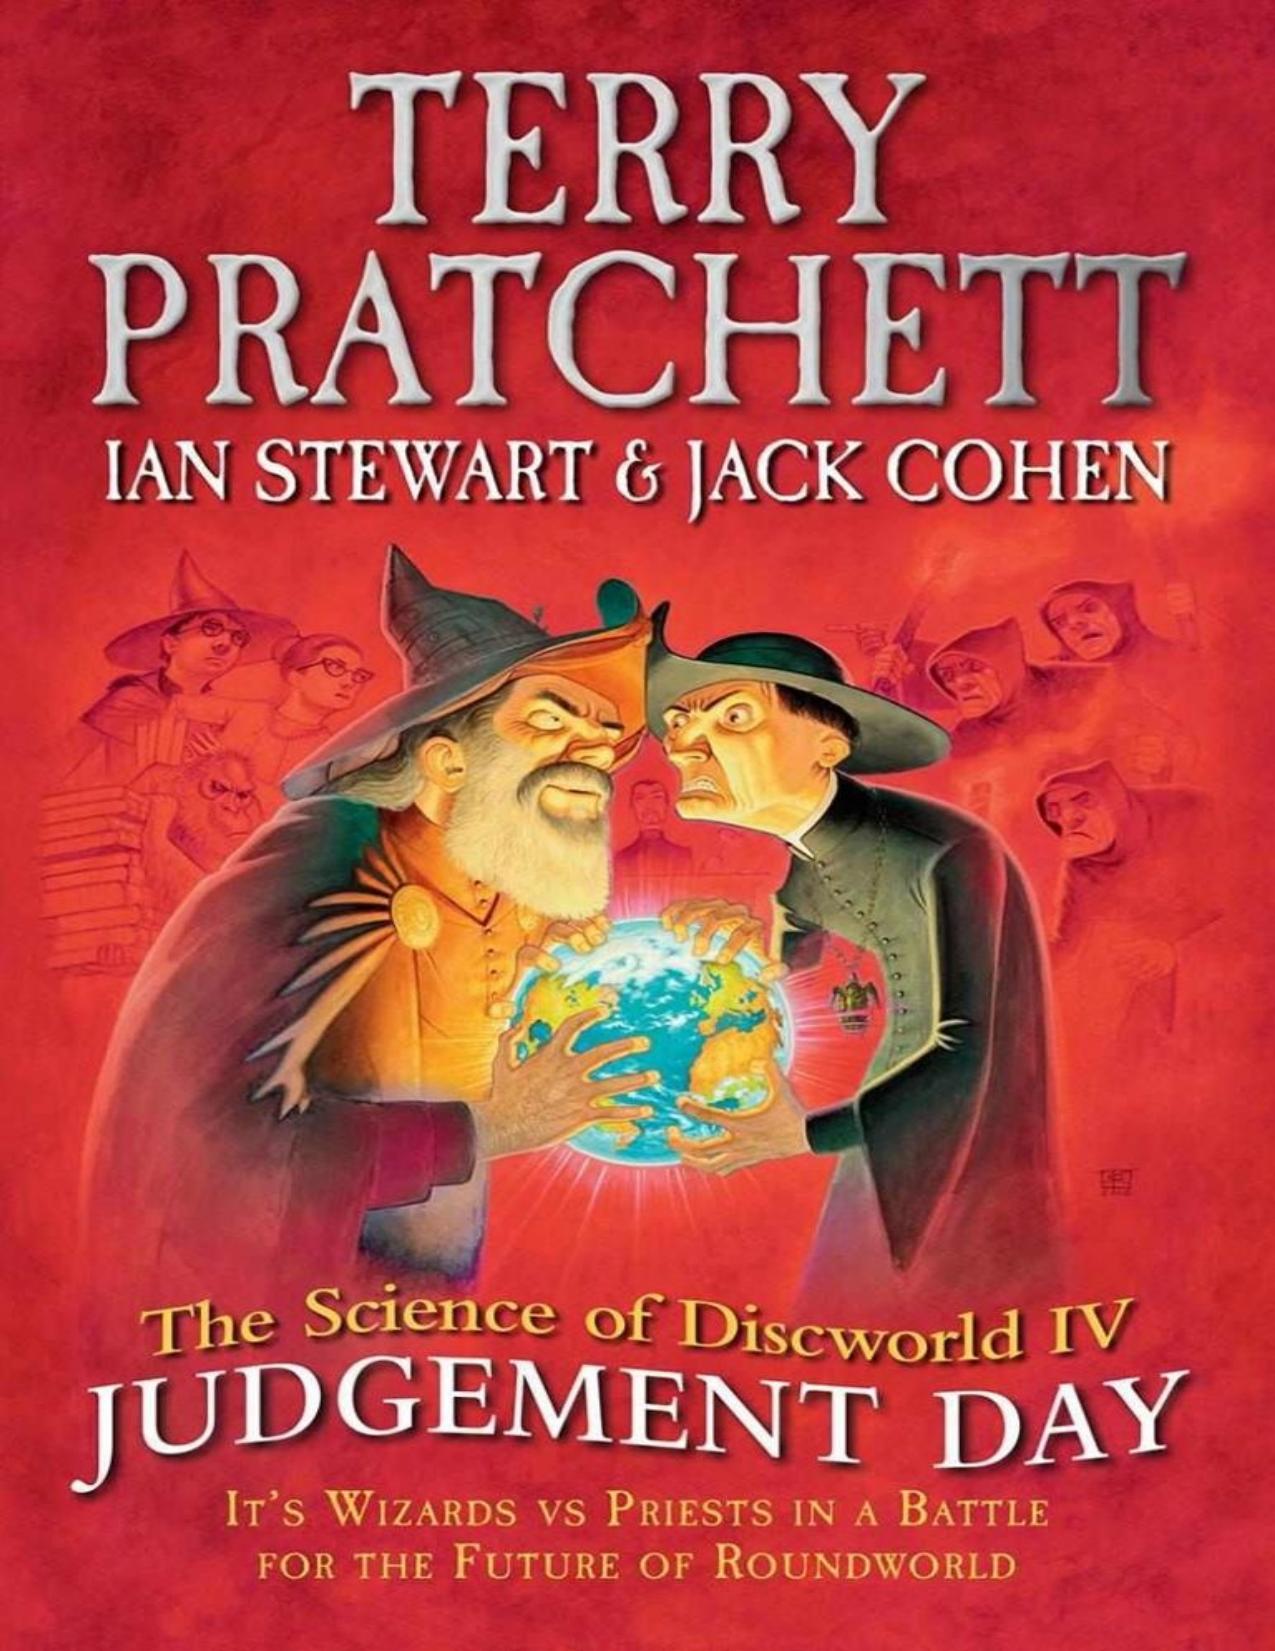 The Science of Discworld IV: Judgement Day by Terry Pratchett